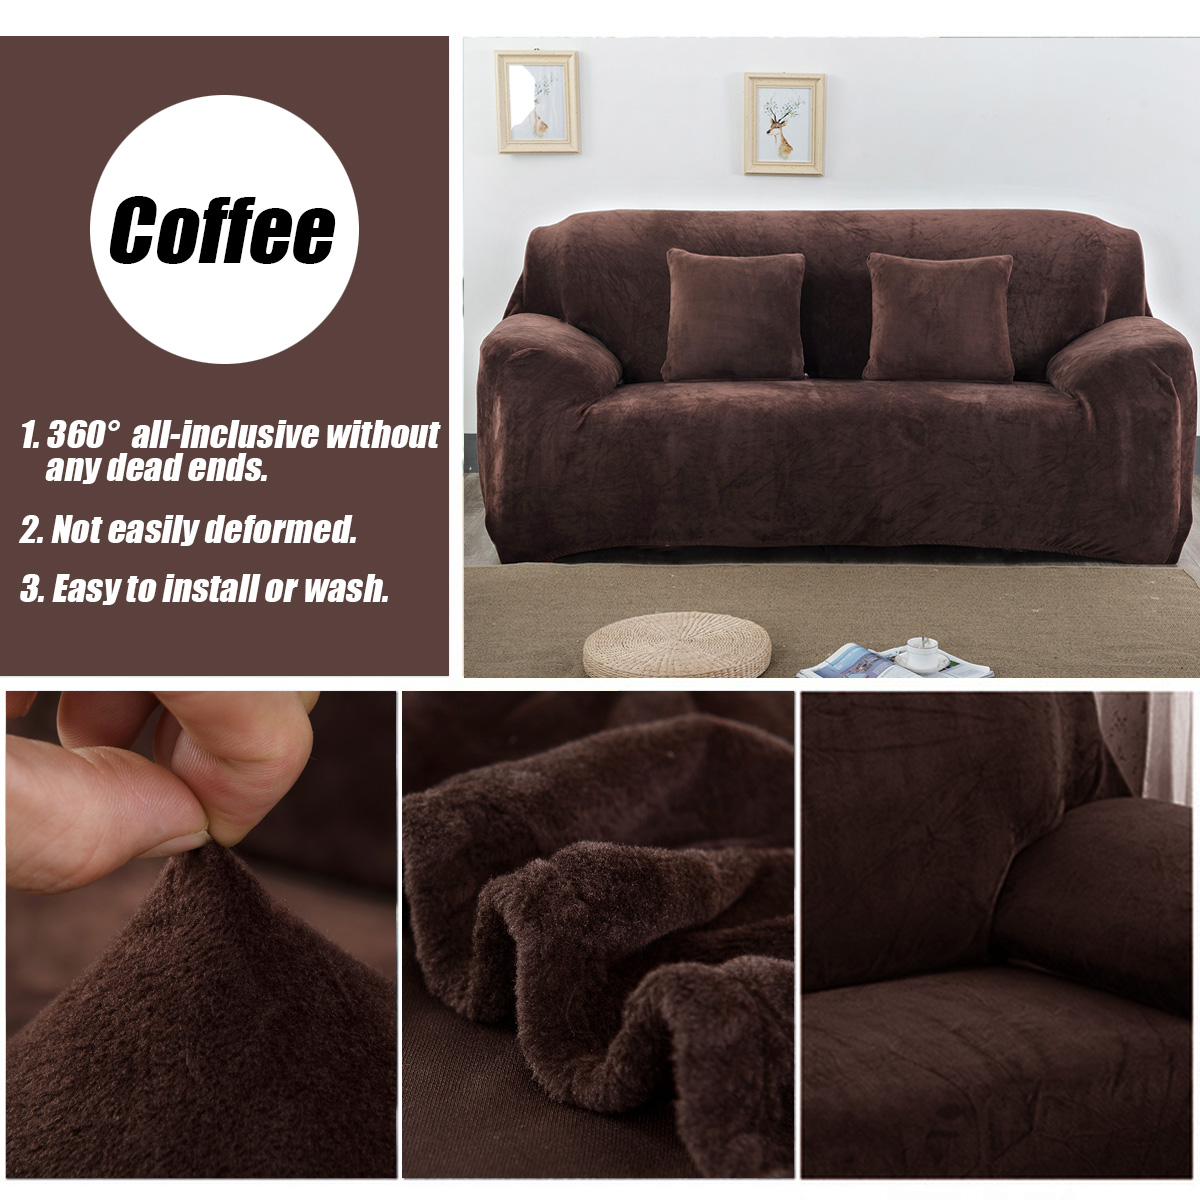 MEIGAR-123-Seats-Elastic-Stretch-Sofa-Armchair-Cover-Universal-Couch-Slipcover-Plush-Warm-For-Autumn-1748751-4